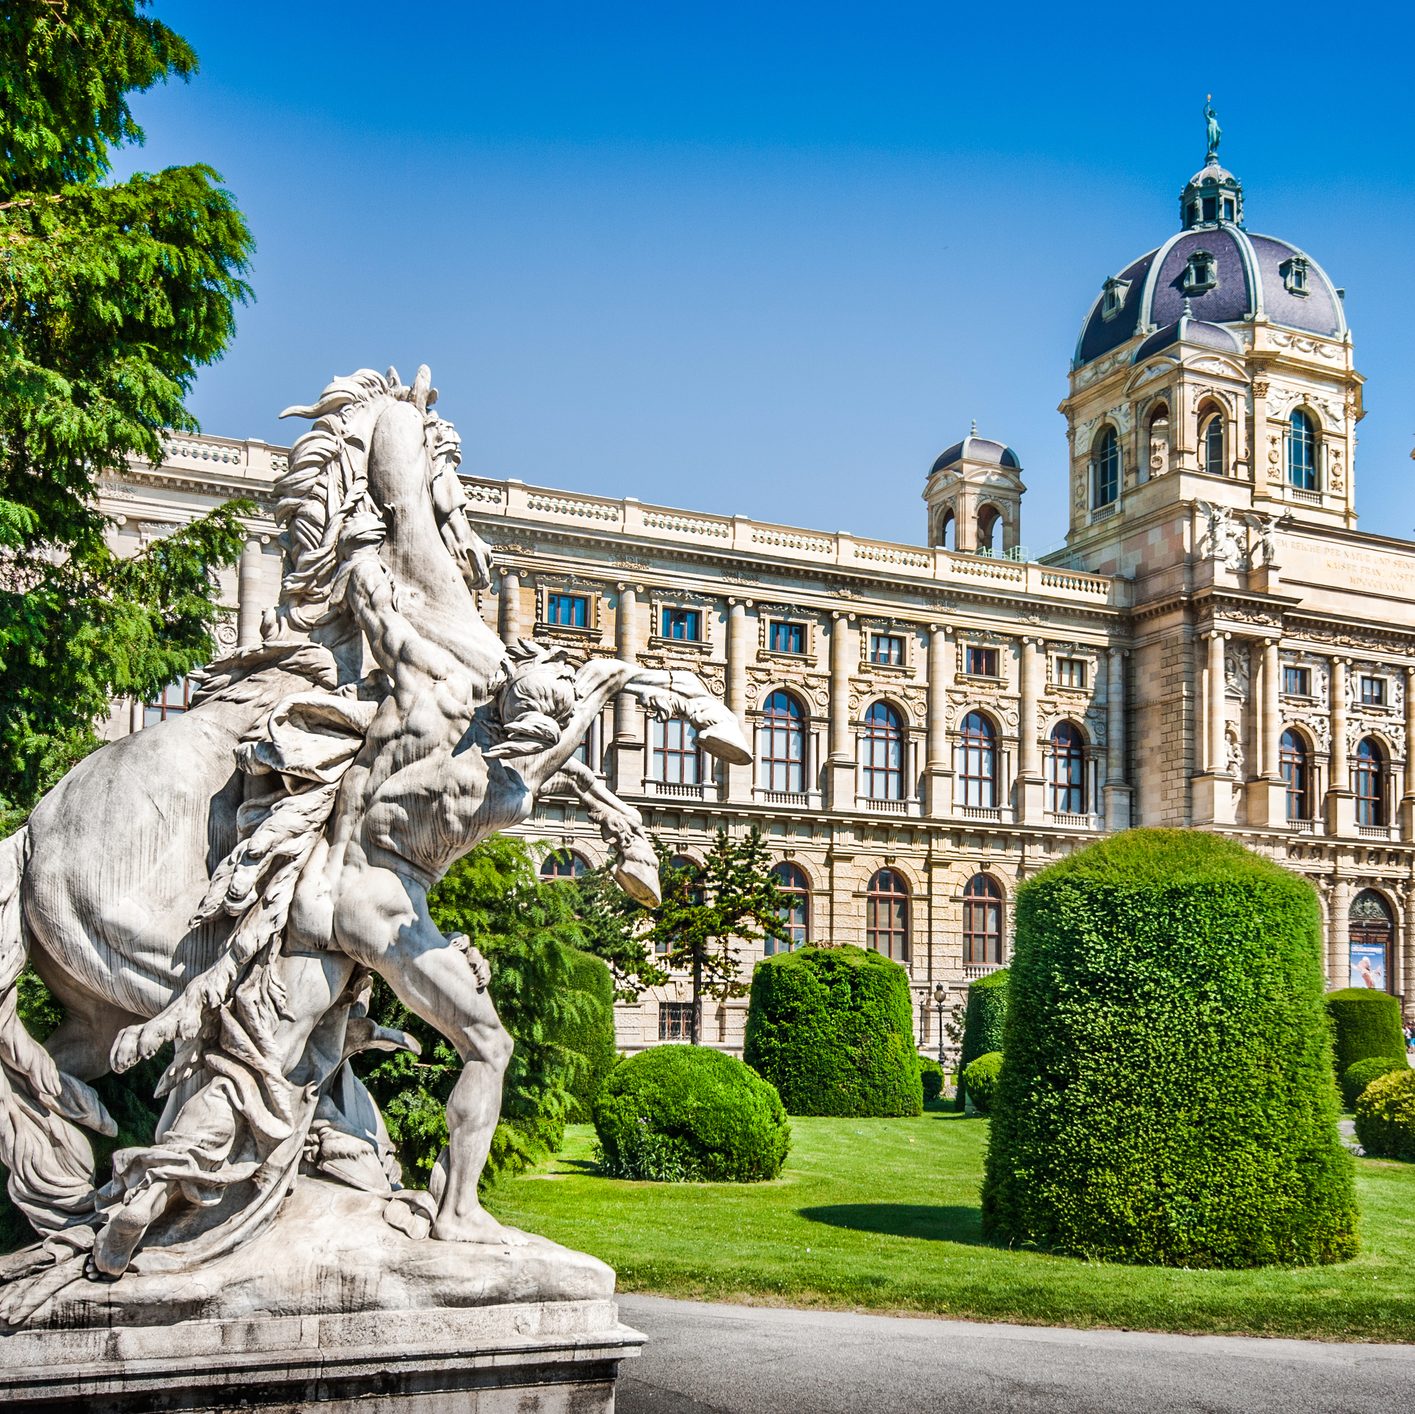 A statue of a horse faces the Natural History Museum in Vienna